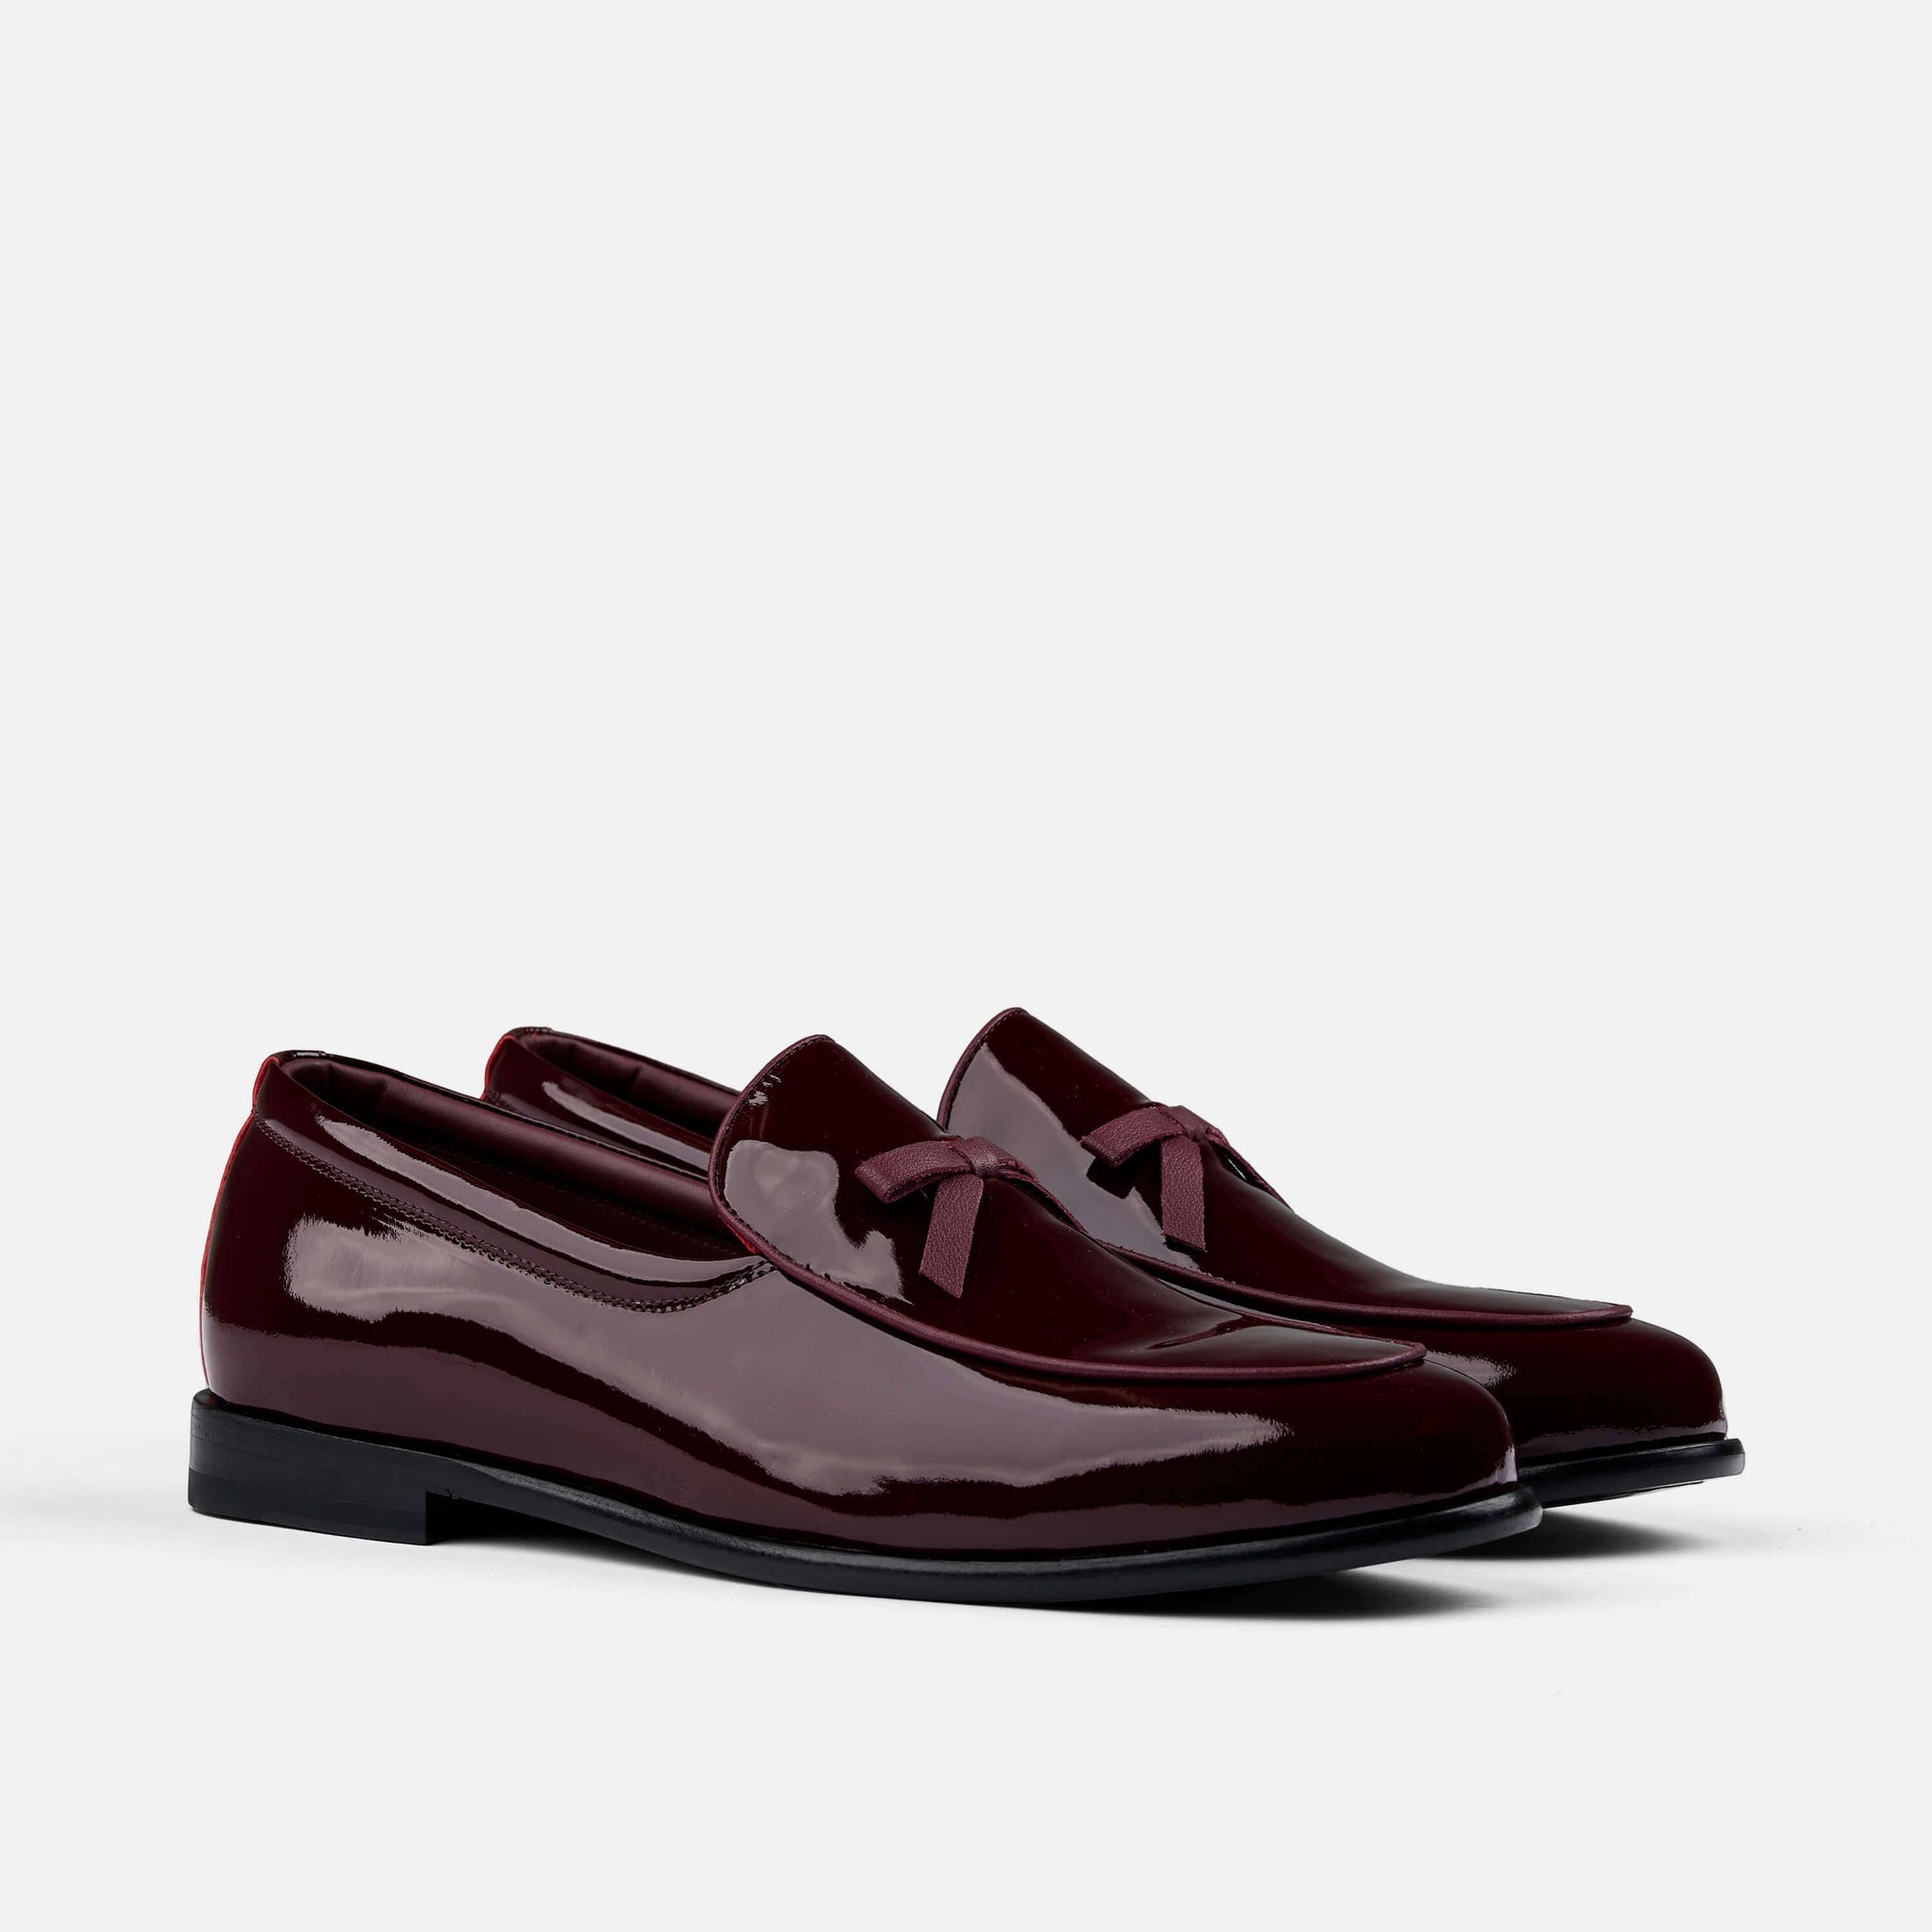 Odell Burgundy Patent Leather Belgian Loafers